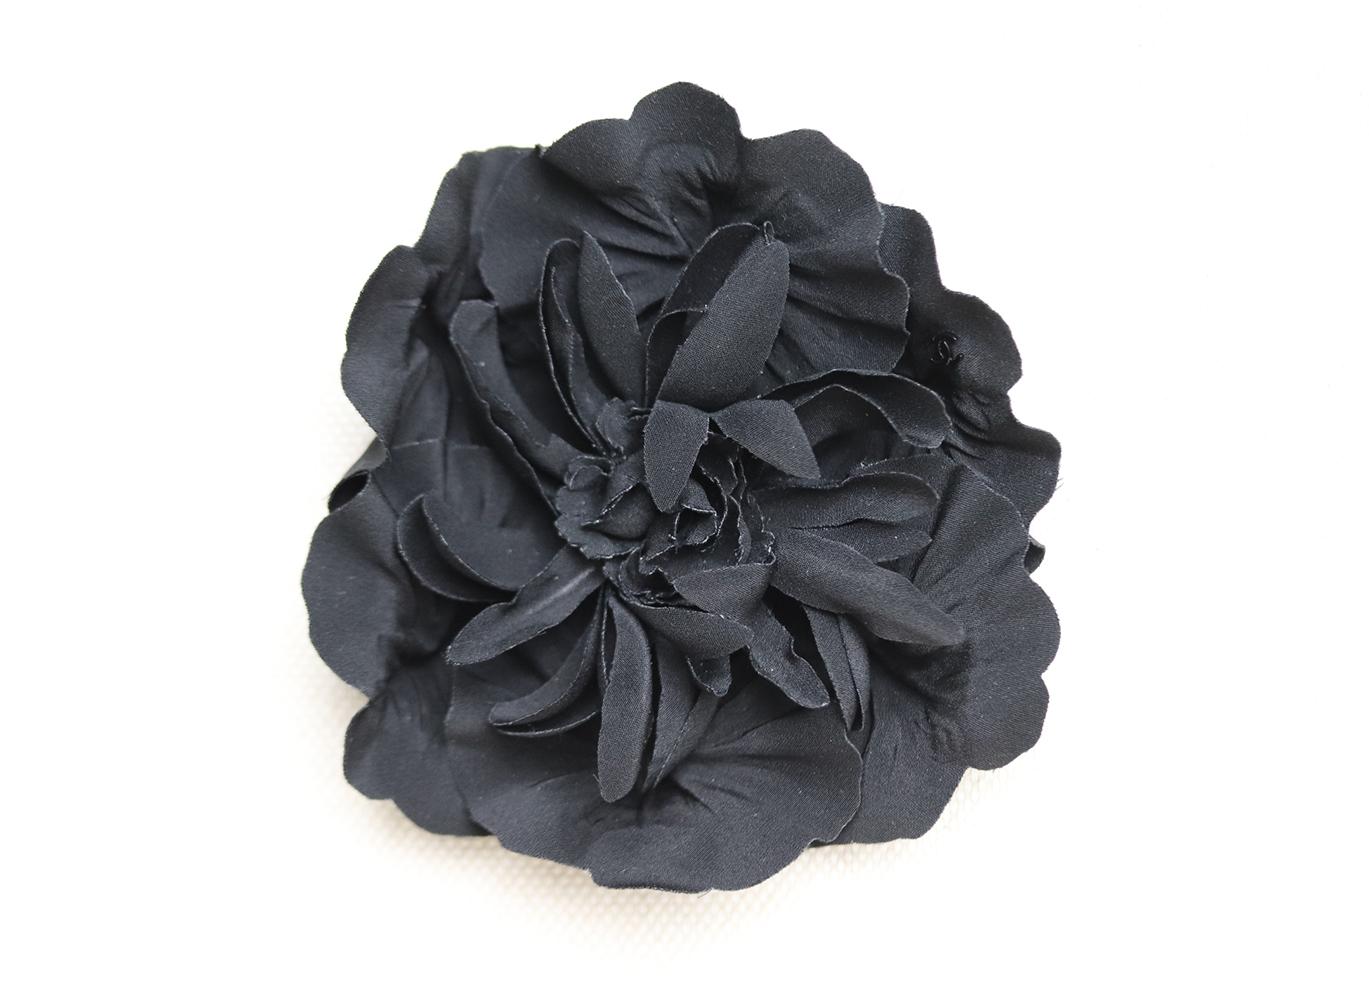 Chanel's pretty brooch is adorned with incredibly lifelike structured silk-chiffon floral petals ranging in different sizes, fastened onto a silver pin, it will make an elegant adornment to blazer lapels or at the neck of a pussy-bow blouse.
Black